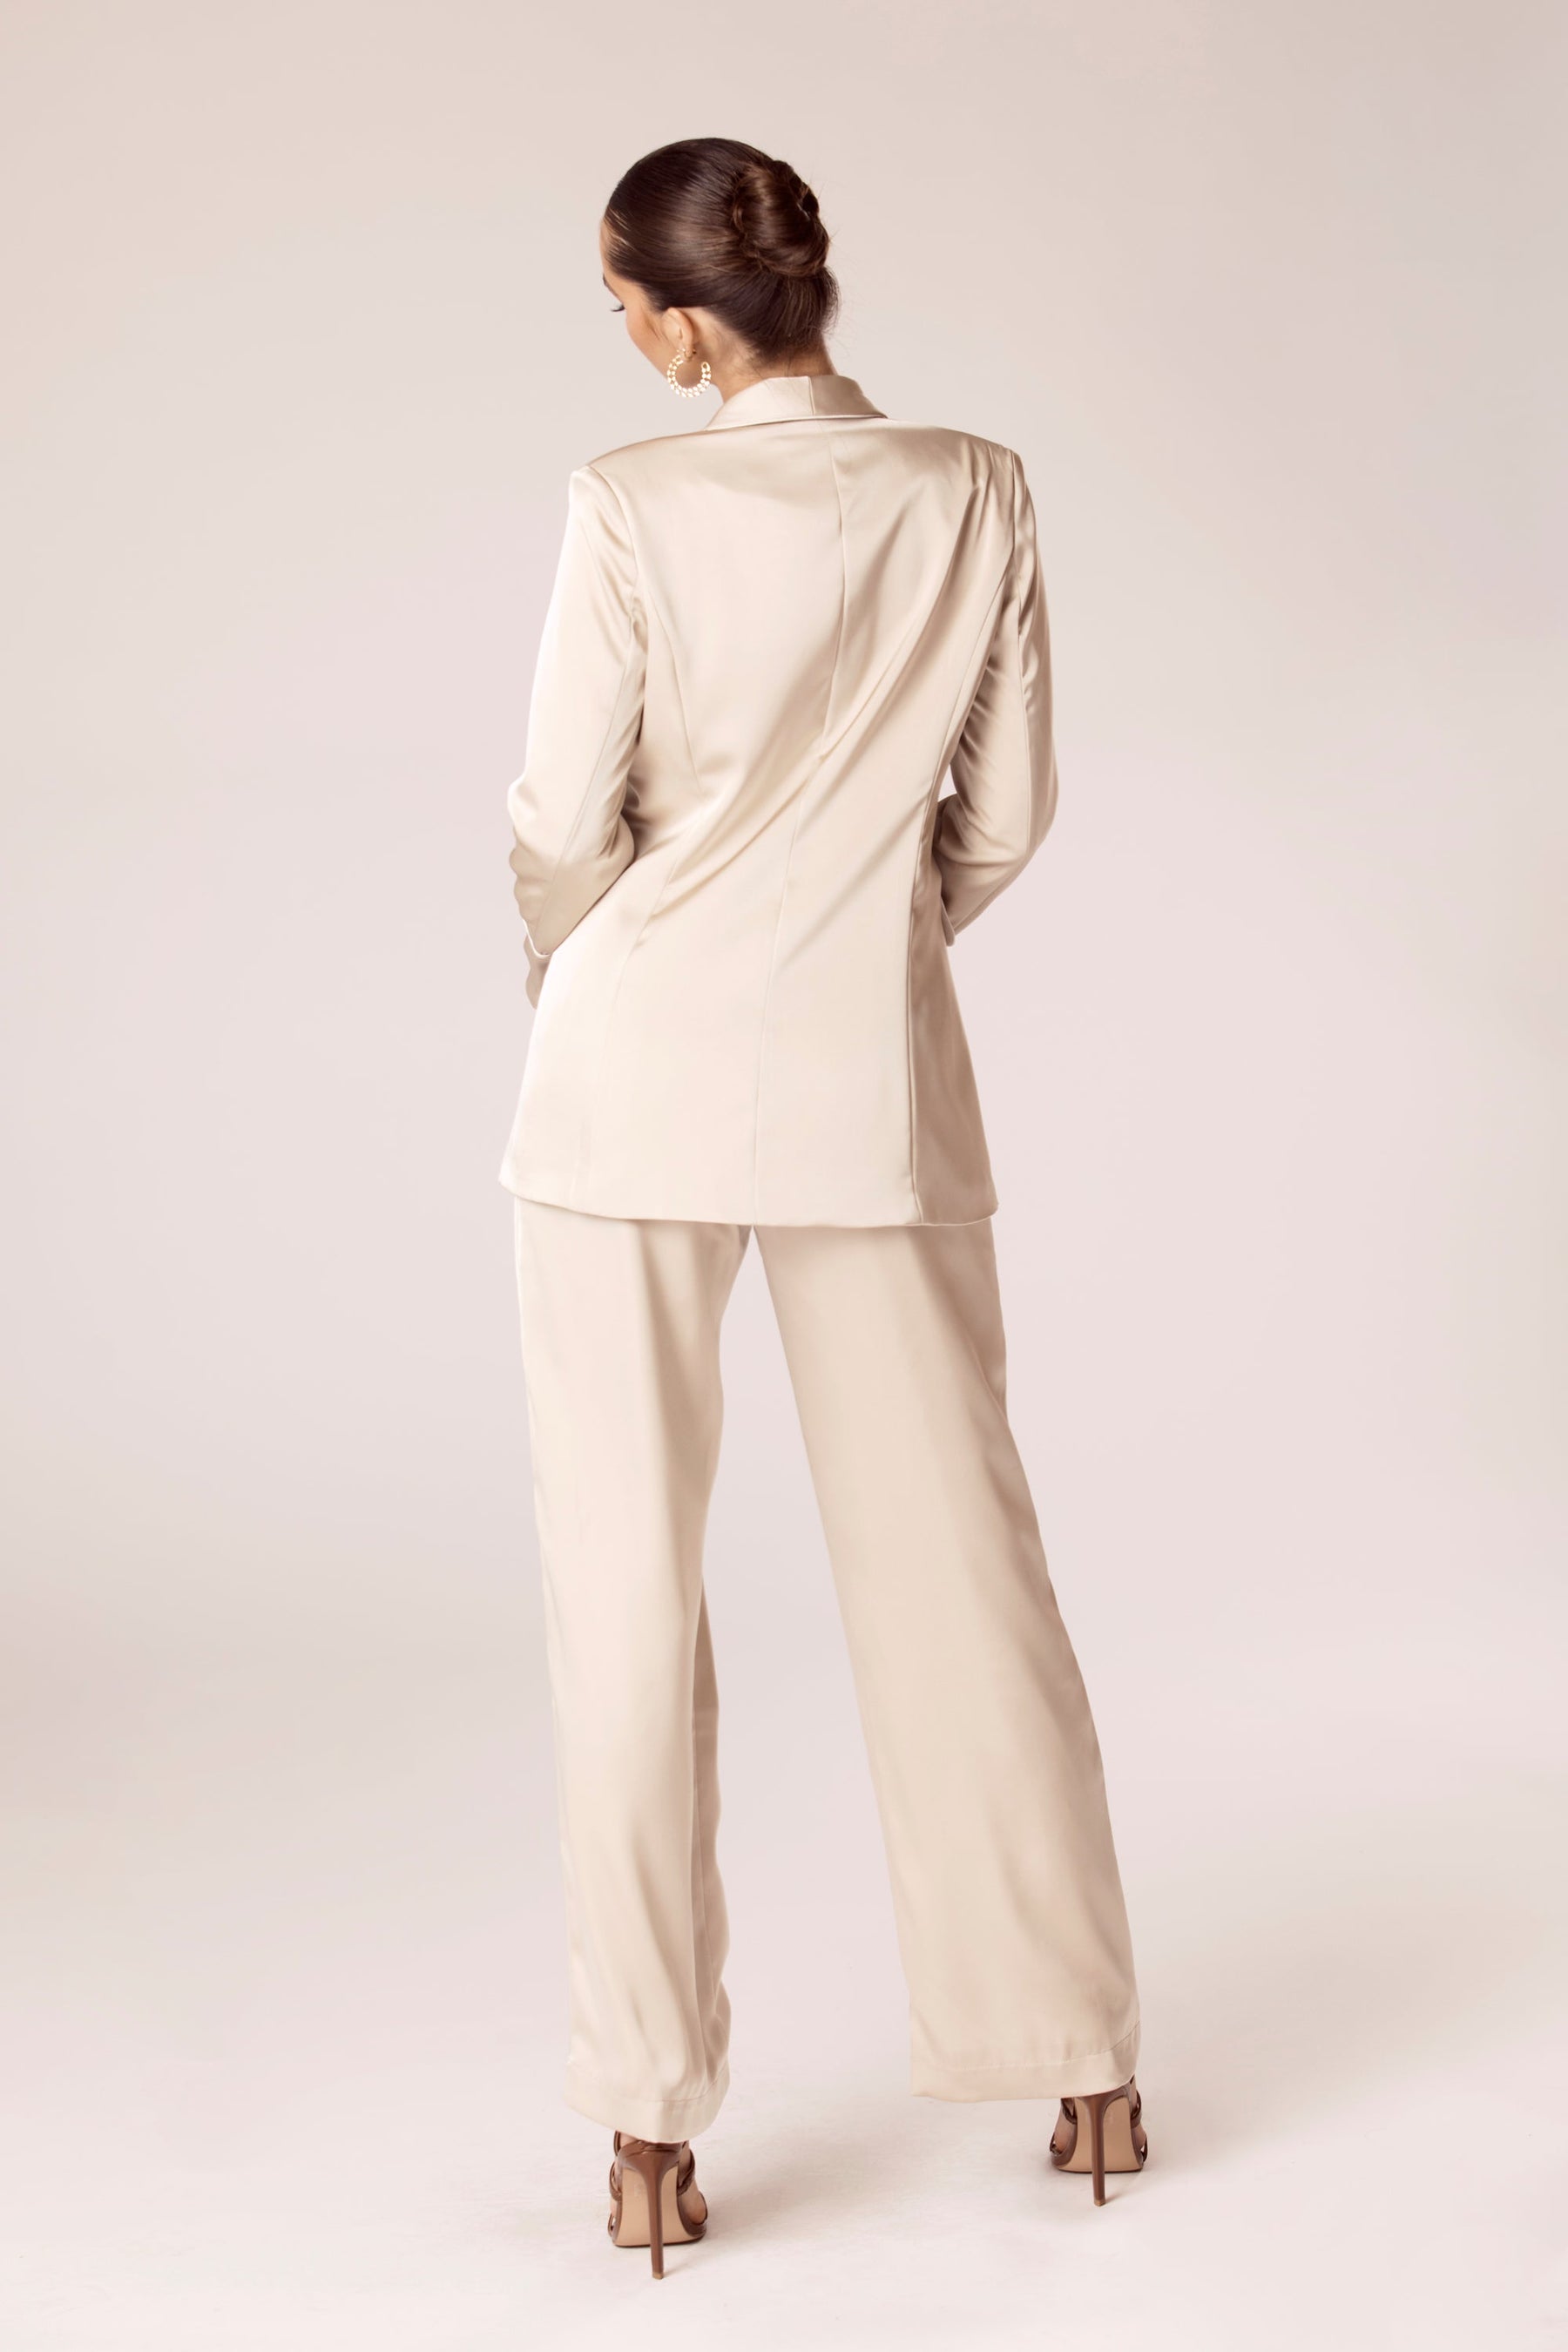 Satin High Rise Trousers - Desert Sand Veiled Collection 